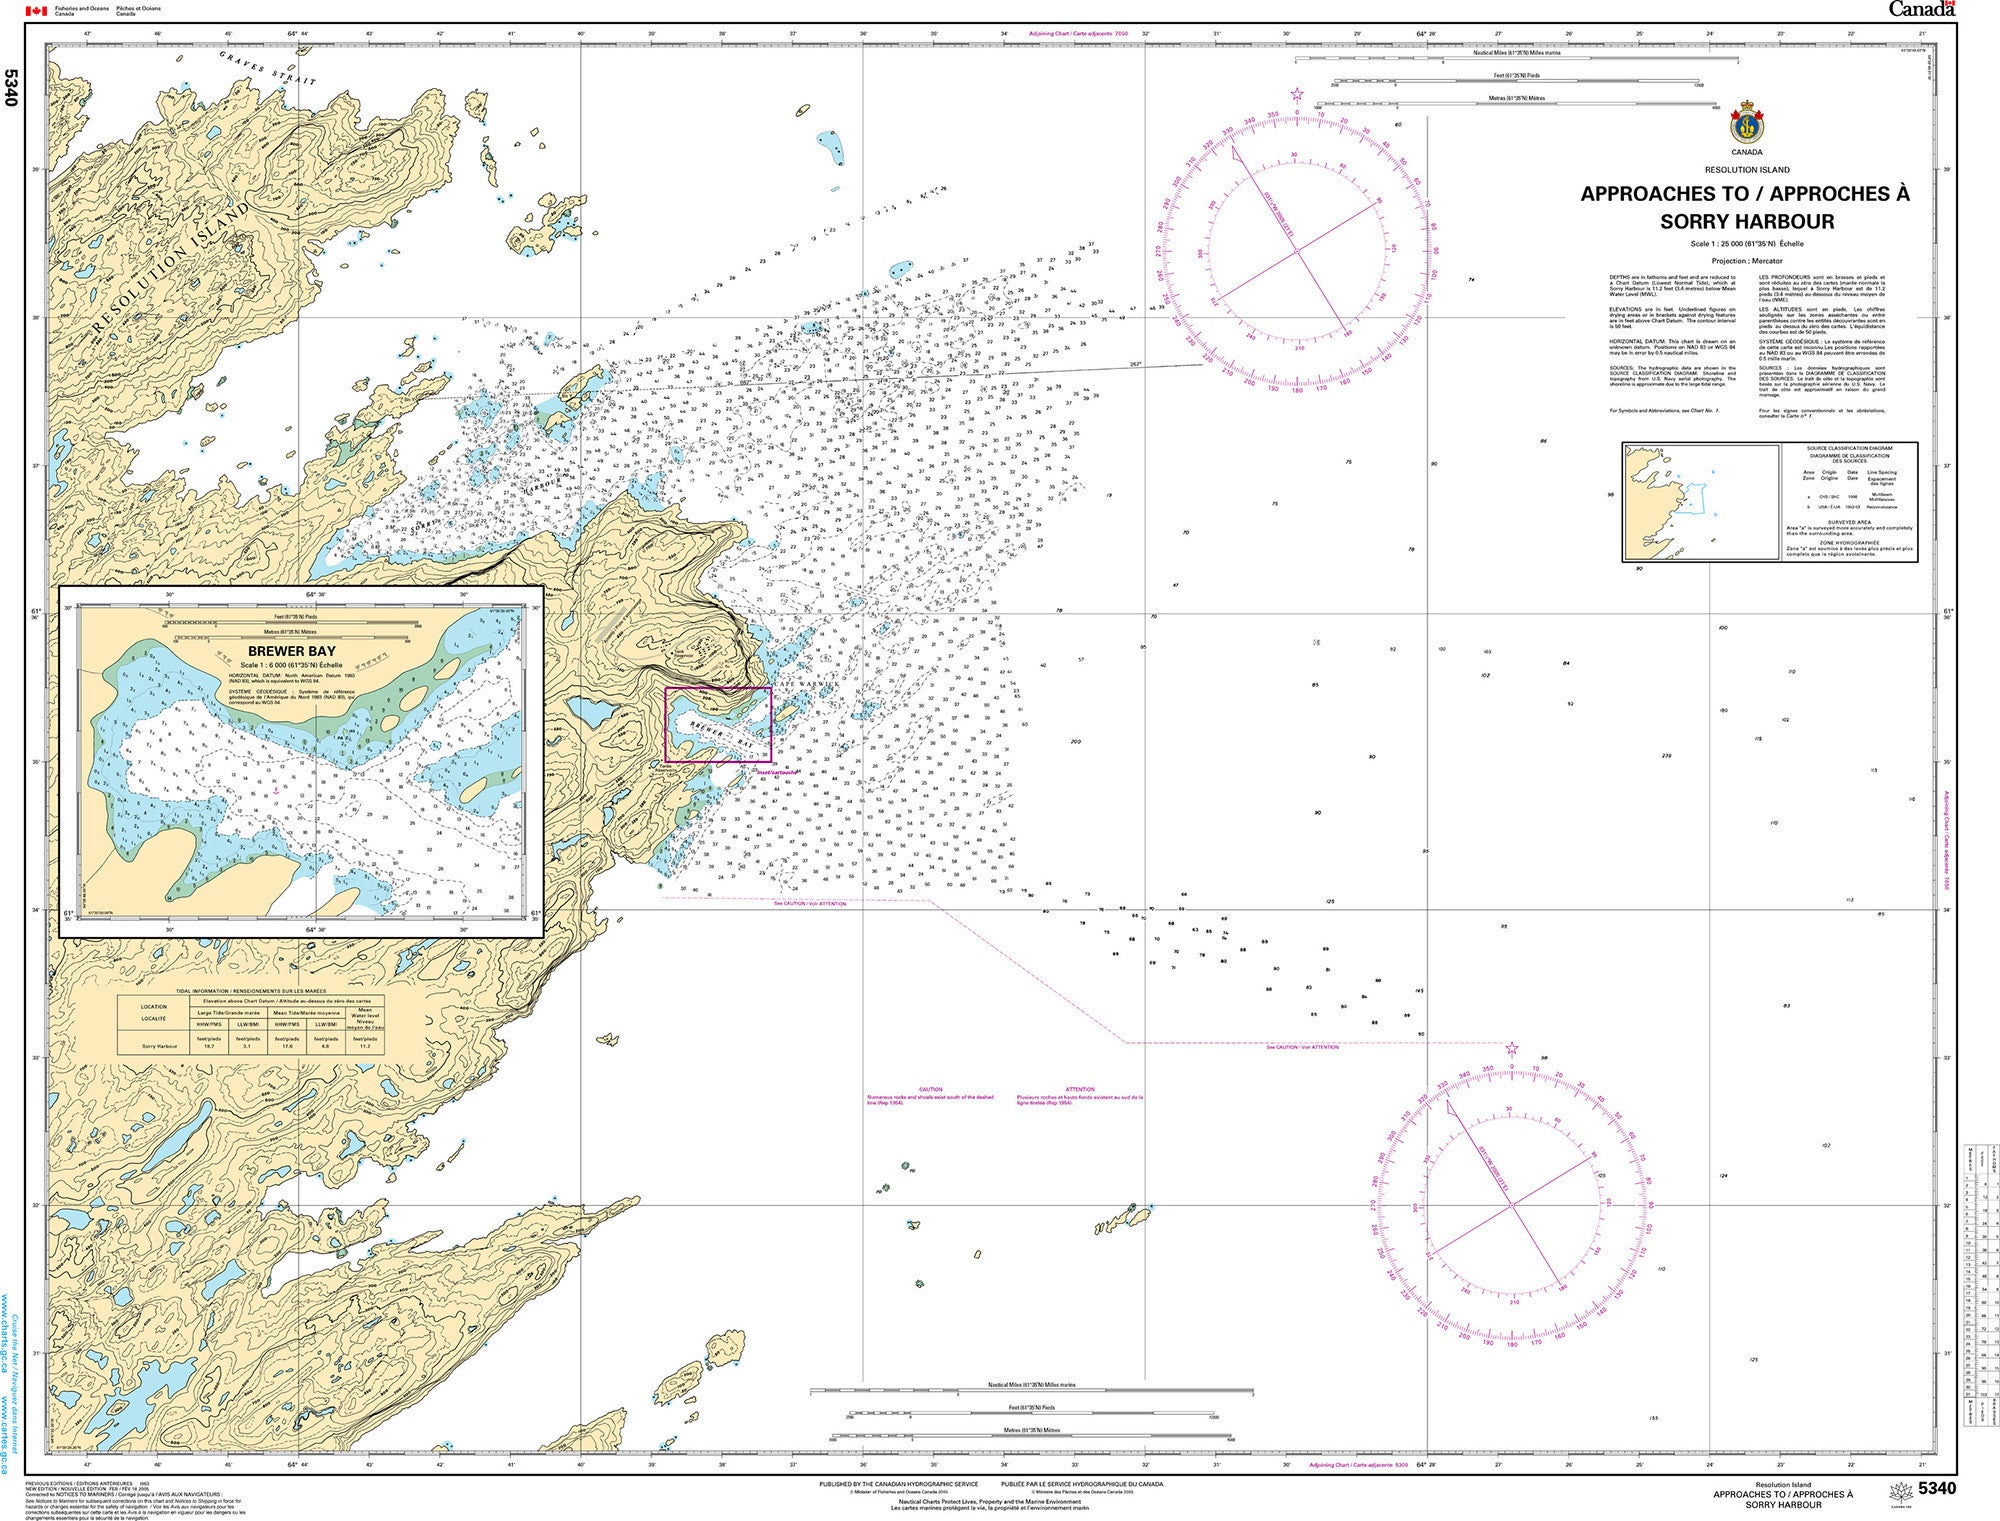 Canadian Hydrographic Service Nautical Chart CHS5340: Approach to/ Approches à Sorry Harbor